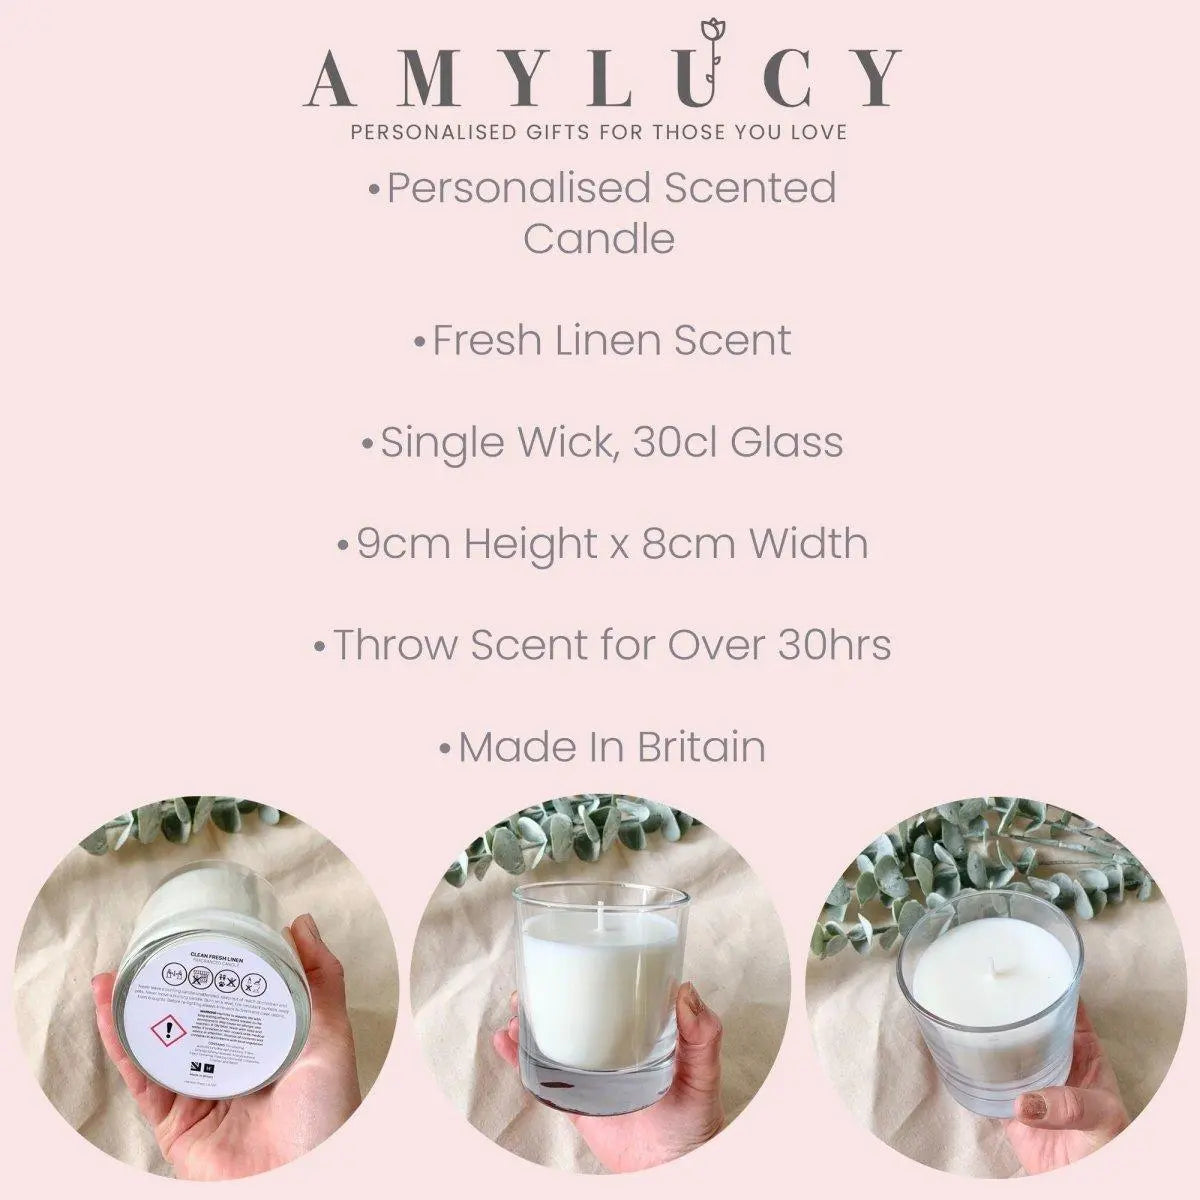 Personalised New Home Candle, Family Names Candle, Housewarming Gift, New Home Gifts, Custom New Home, Home Decor, Couple Gift, Home Gifts - Amy Lucy